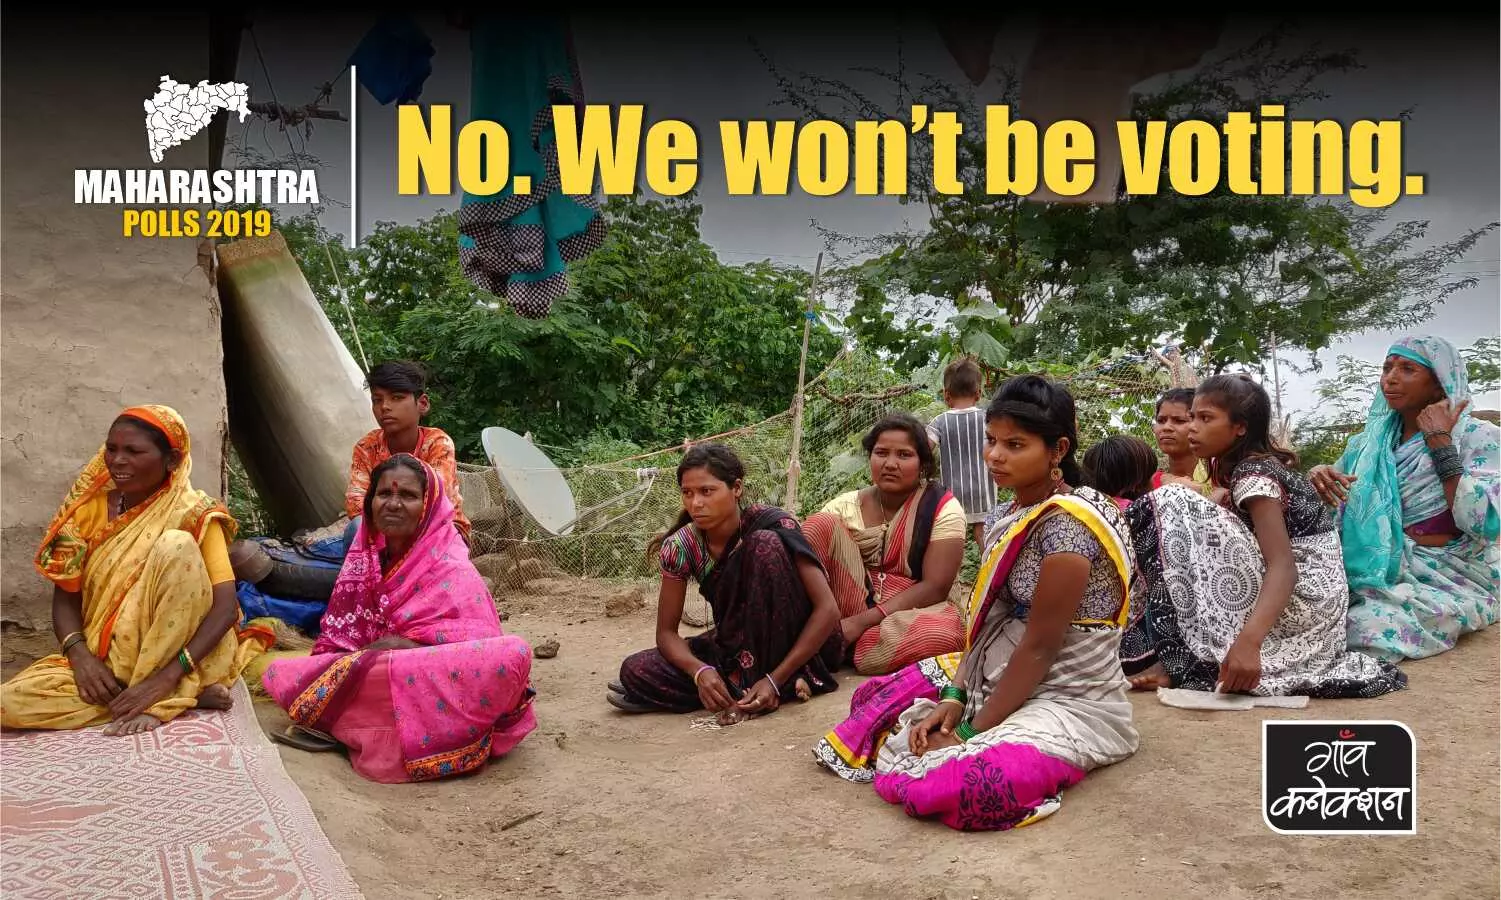 Maharashtra is all set for the polls, but many from this village wont be voting